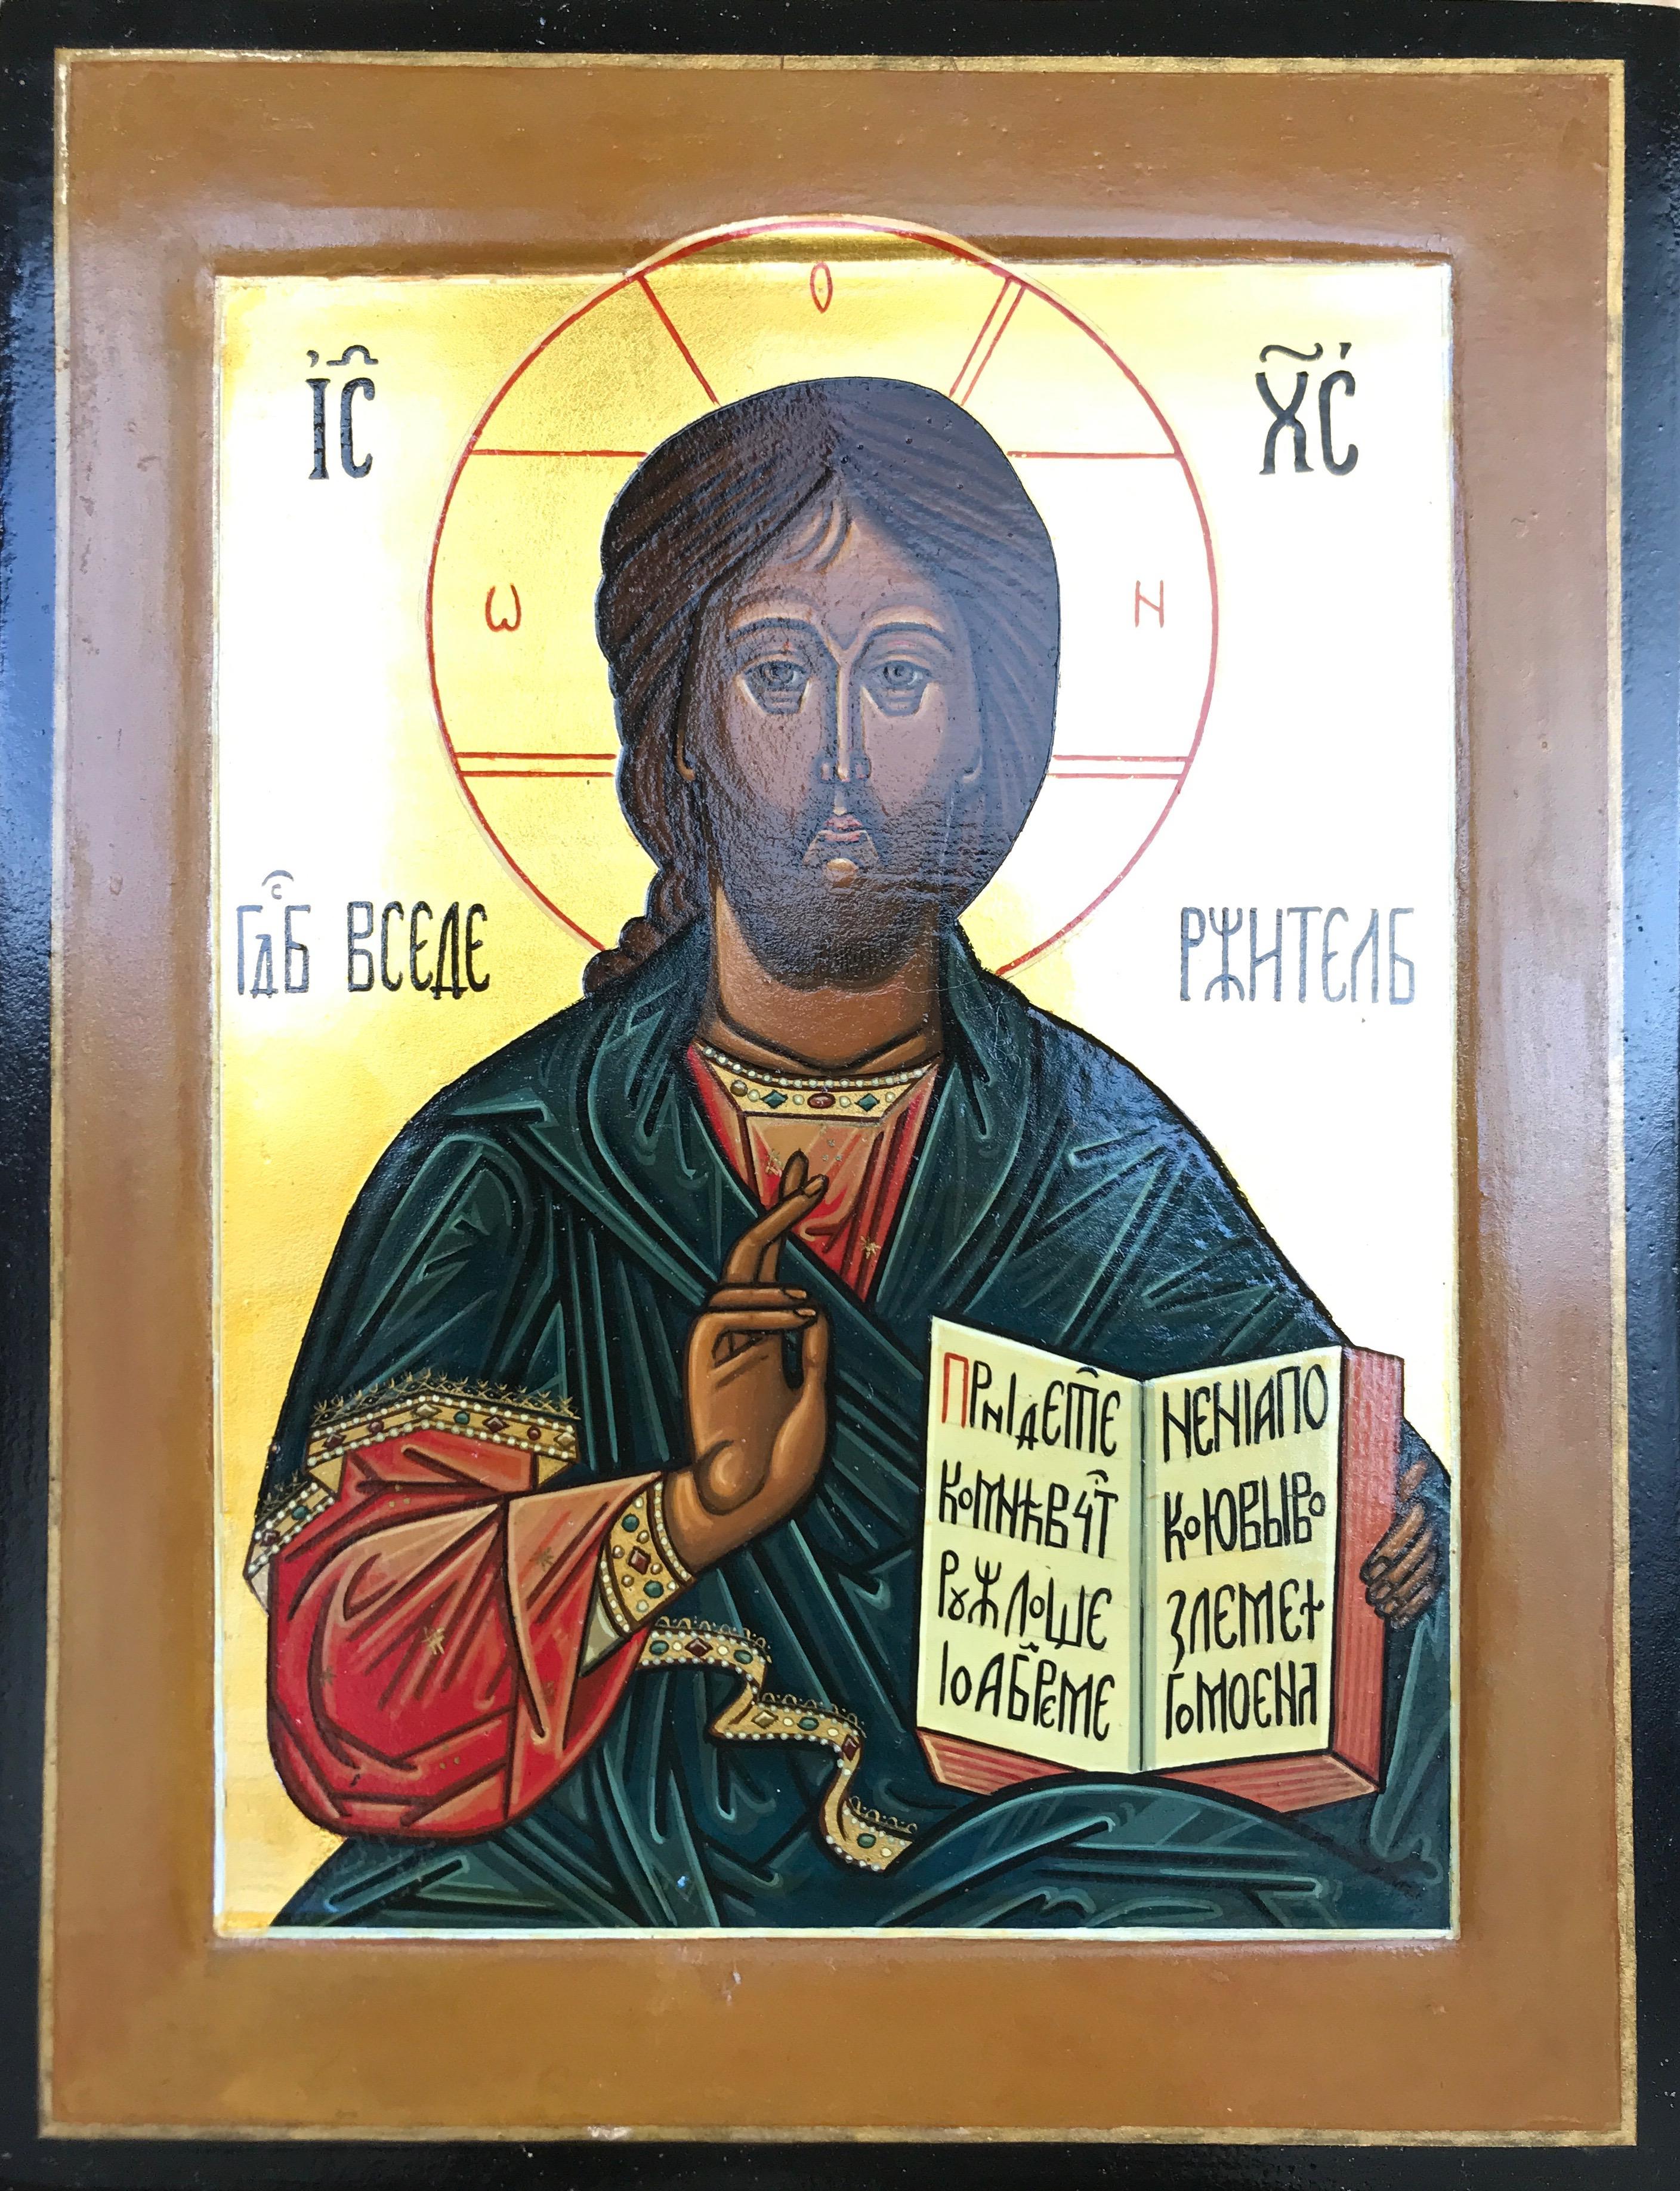 Christ Pantocrator after an Russian icon of the 15th Century - Painting by Oliver Samsinger